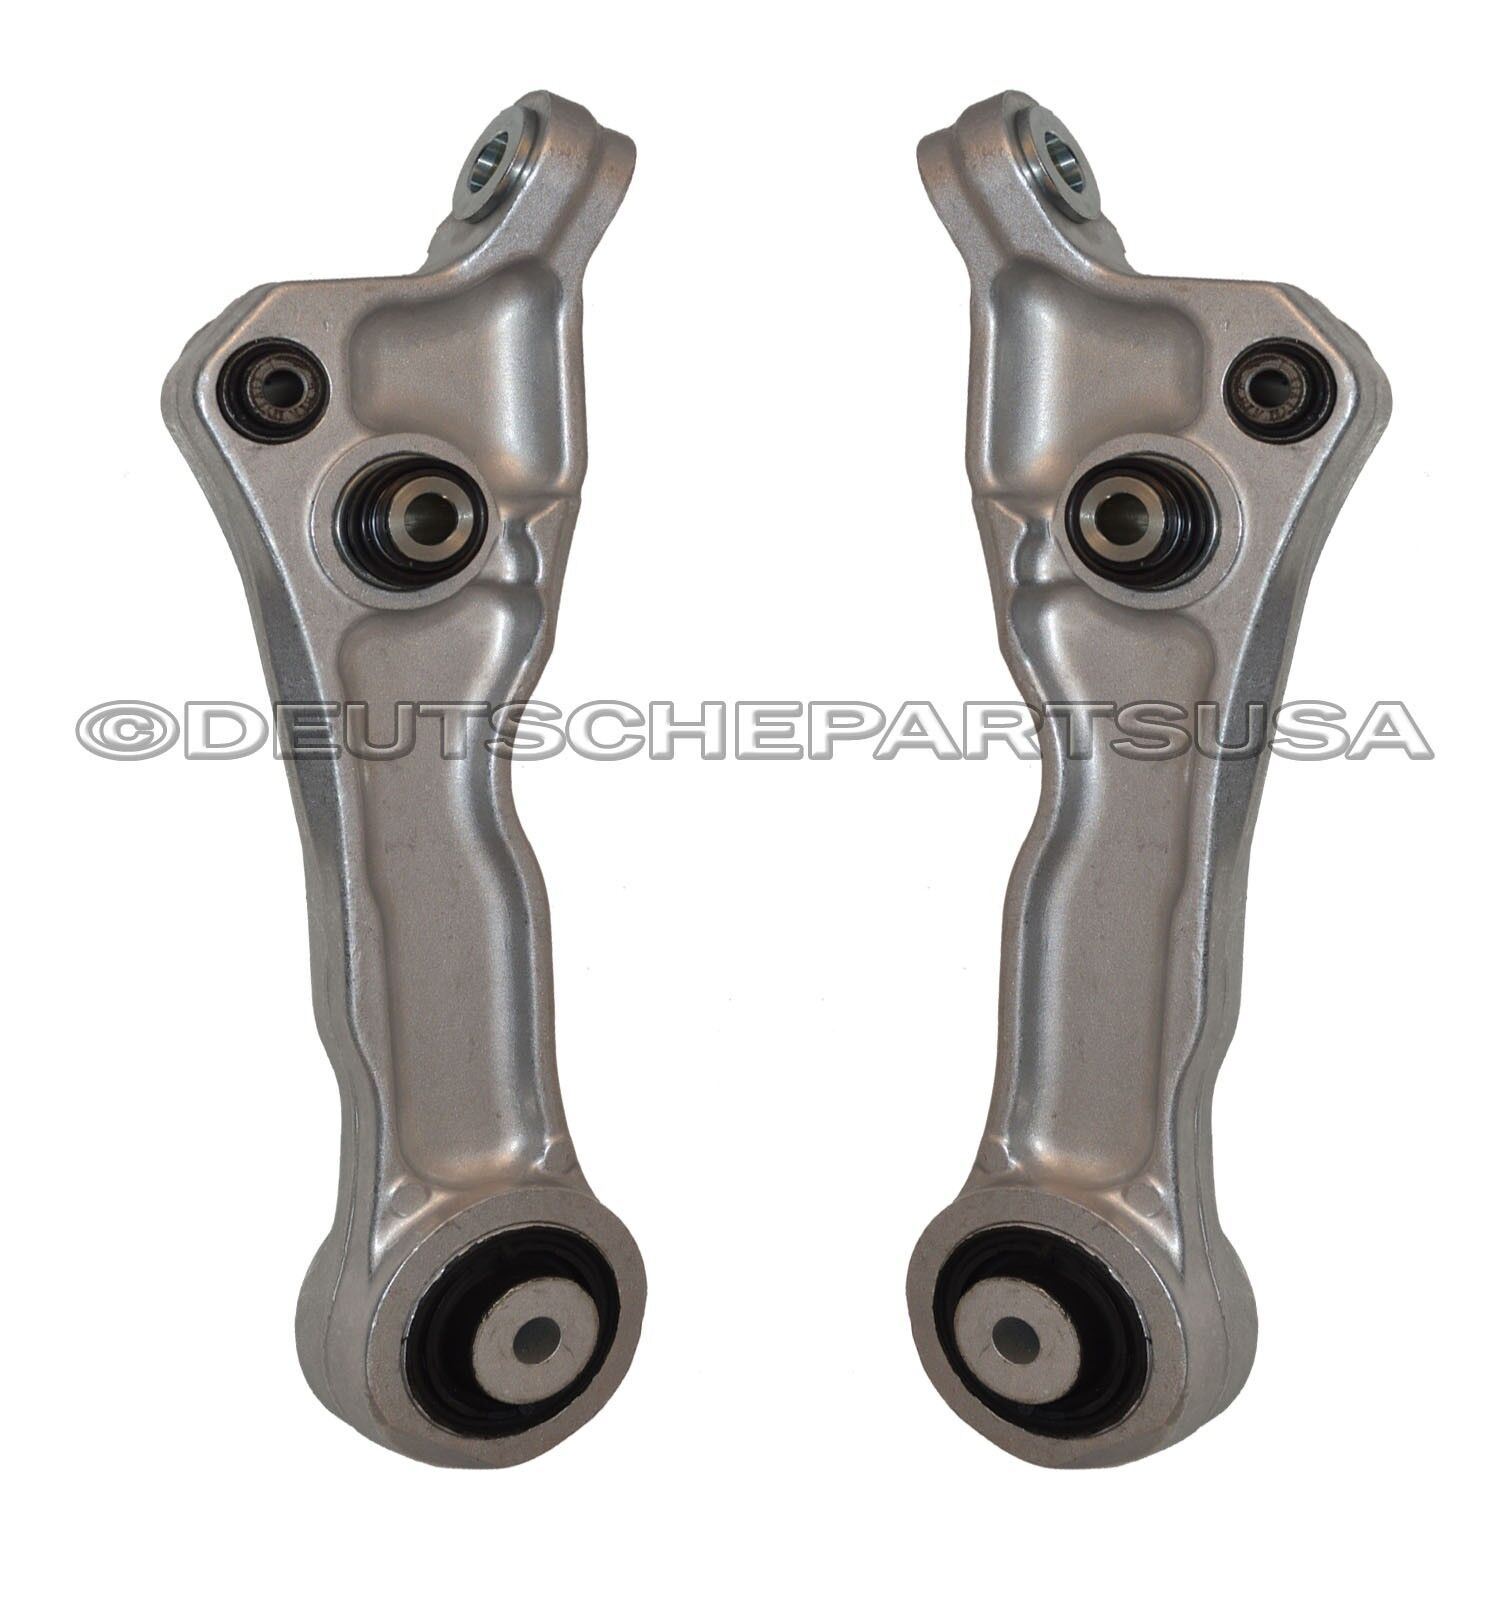 FRONT LEFT + RIGHT LOWER REAR Lateral Control Arms for JAGUAR S-TYPE XF XJR XJ8